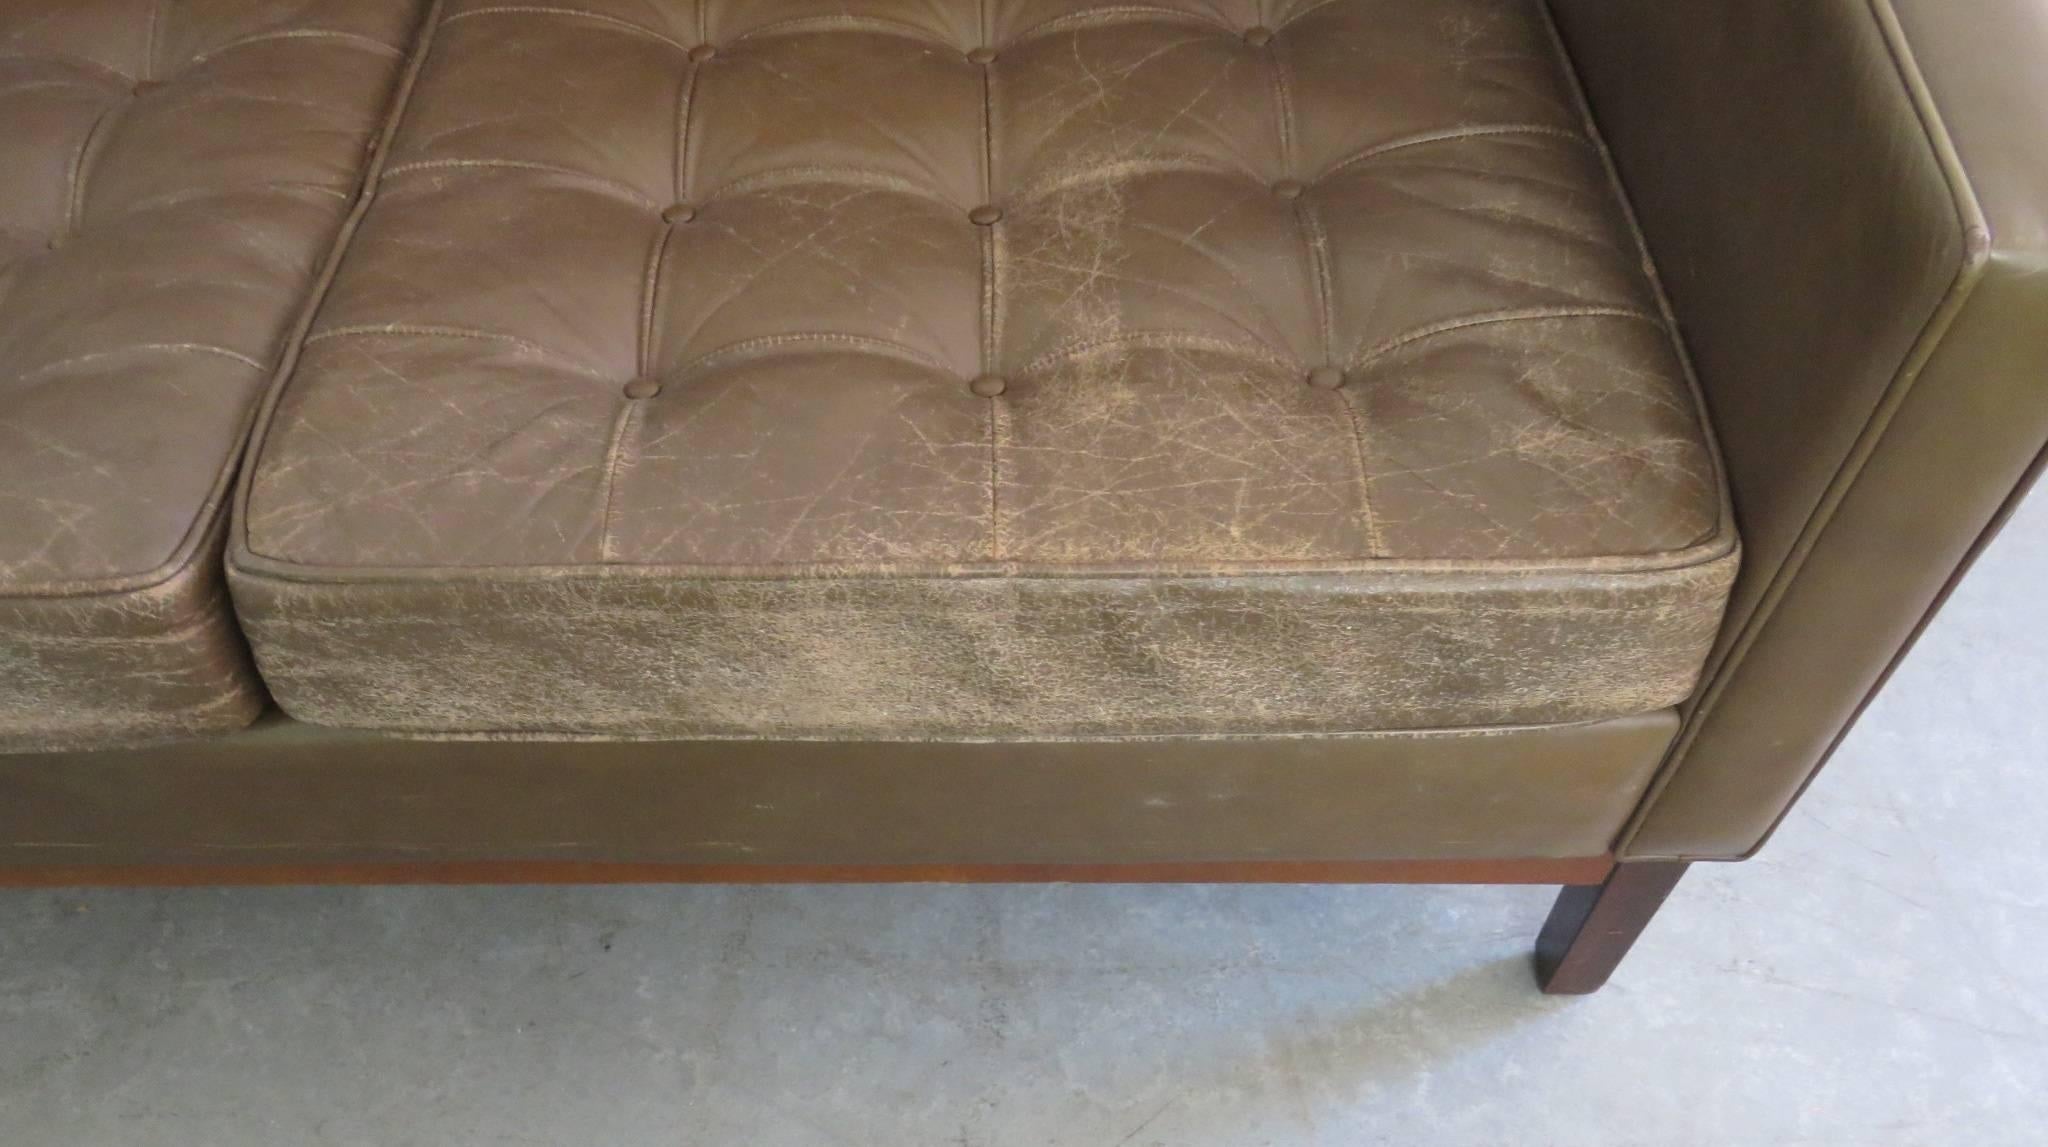 Knoll distressed tufted leather sofa. Size 16.5